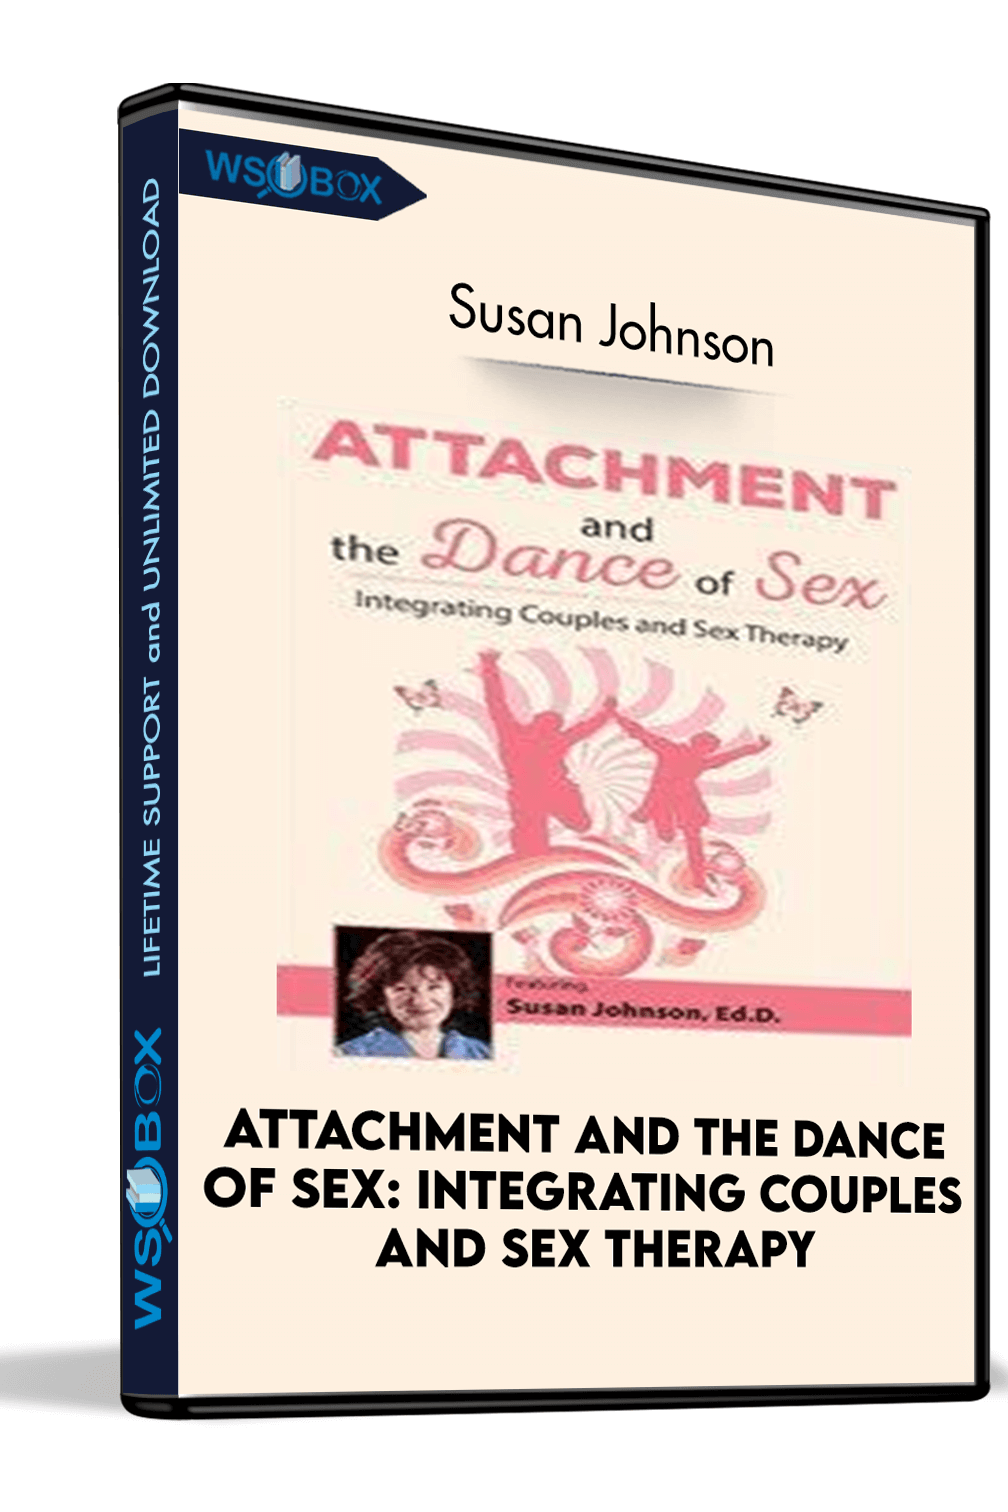 attachment-and-the-dance-of-sex-integrating-couples-and-sex-therapy-susan-johnson